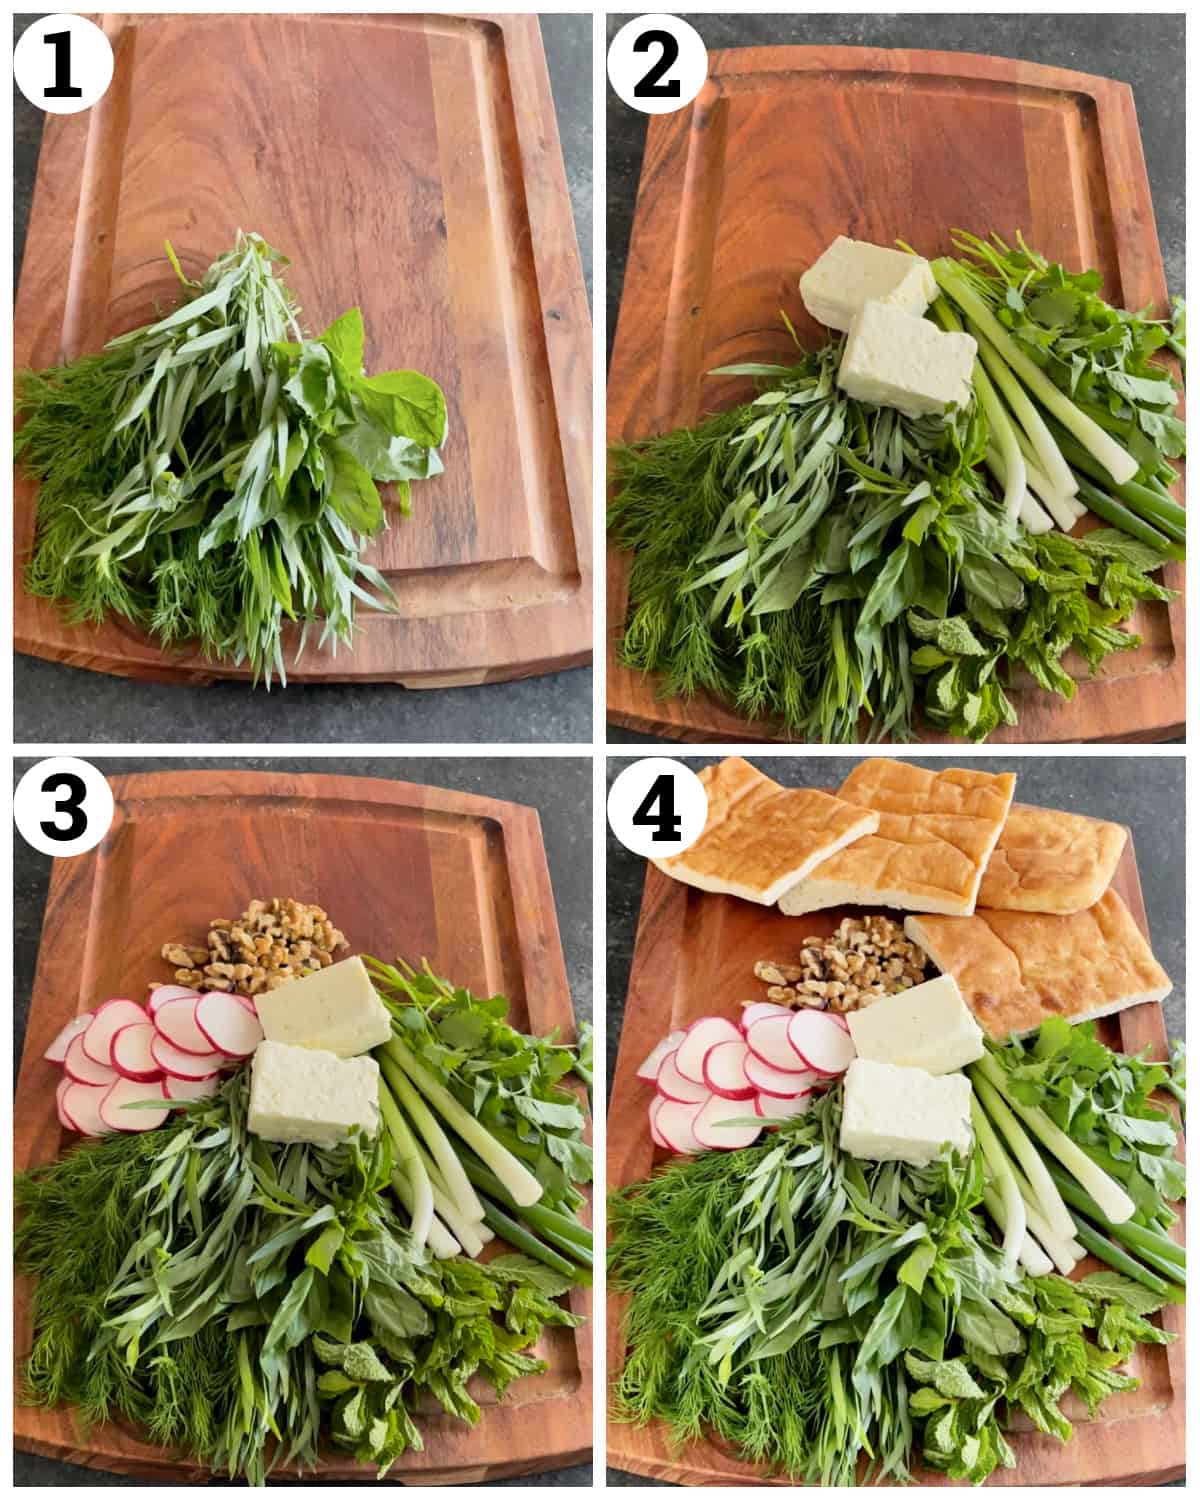 Arrange the herbs, add the cheese and walnuts and fill the board with bread. 